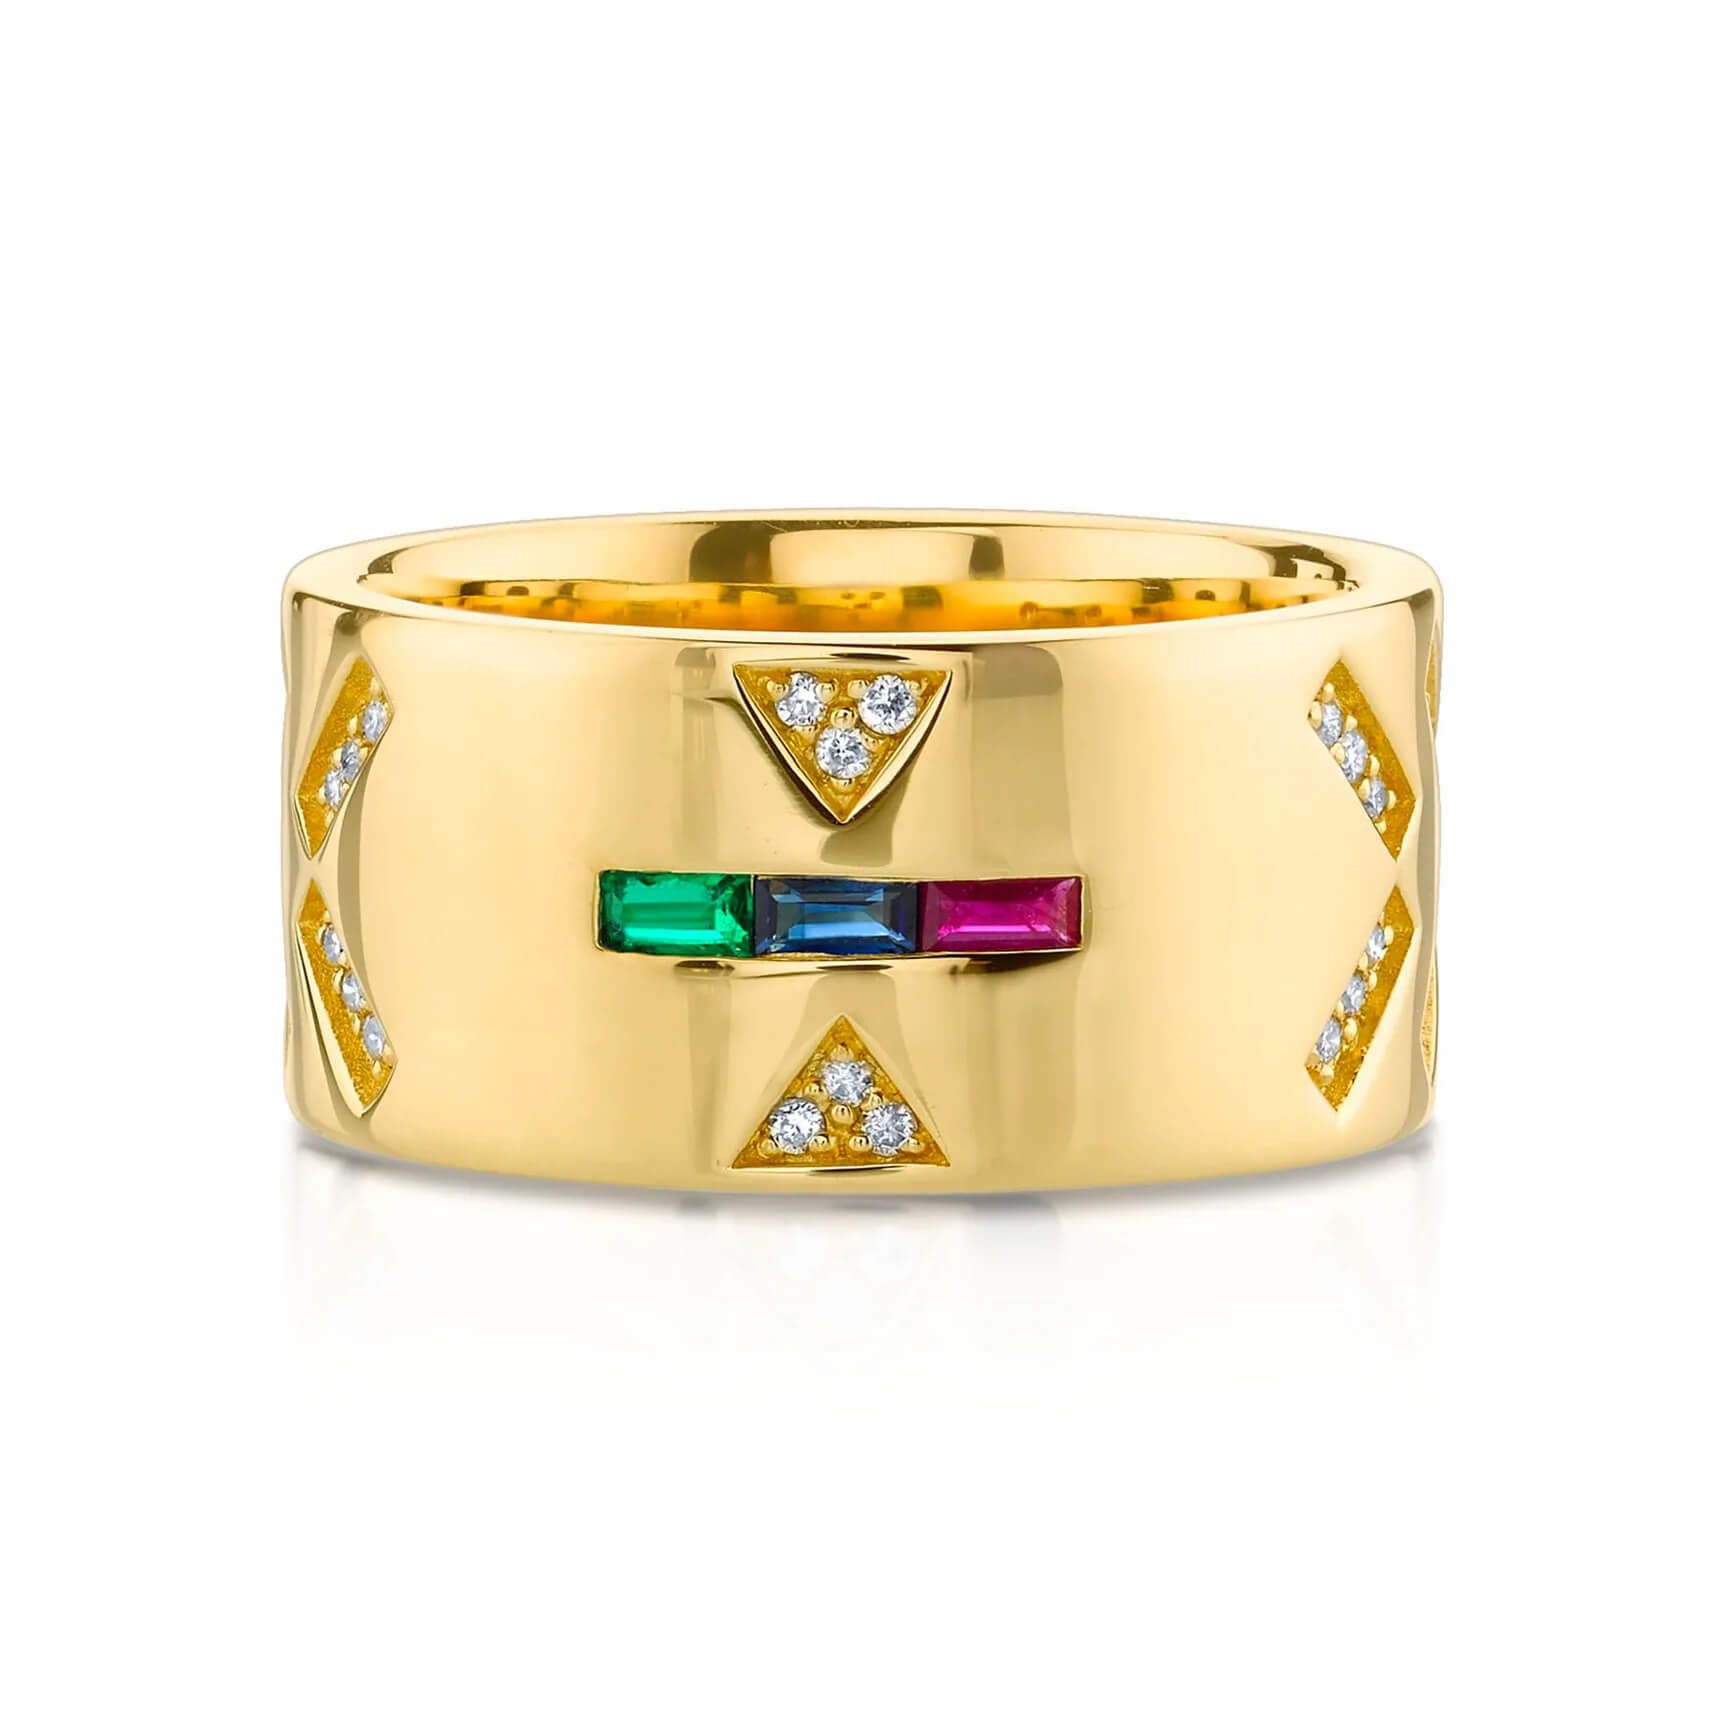 The Last Line 14k yellow gold, white diamond, and rainbow gemstones “Tattoo Wide Cigar Band,” $1,375 at The Last Line